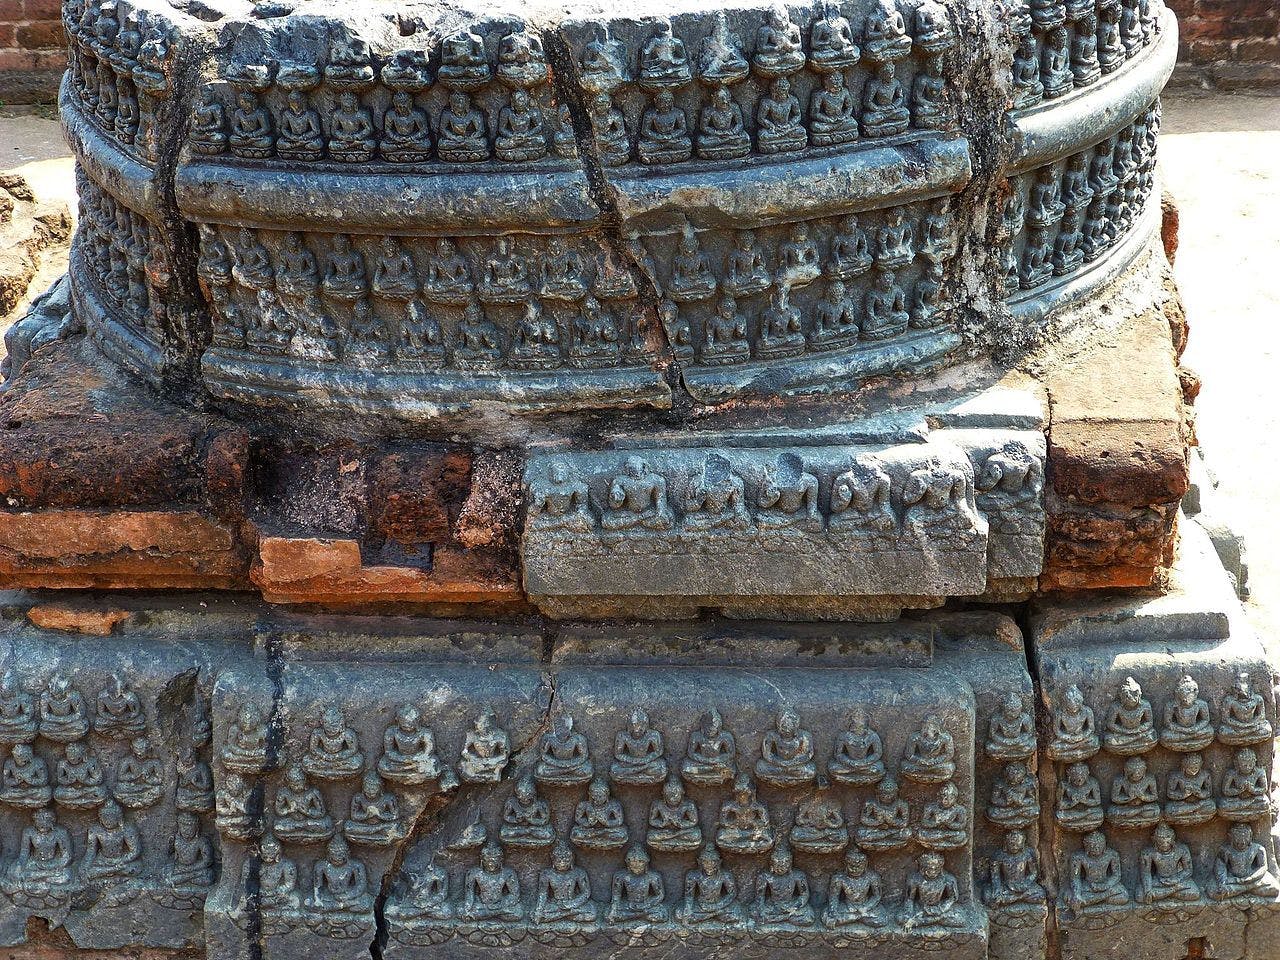 Detailing on a votive stupa, it shows Buddhas in different Mudras